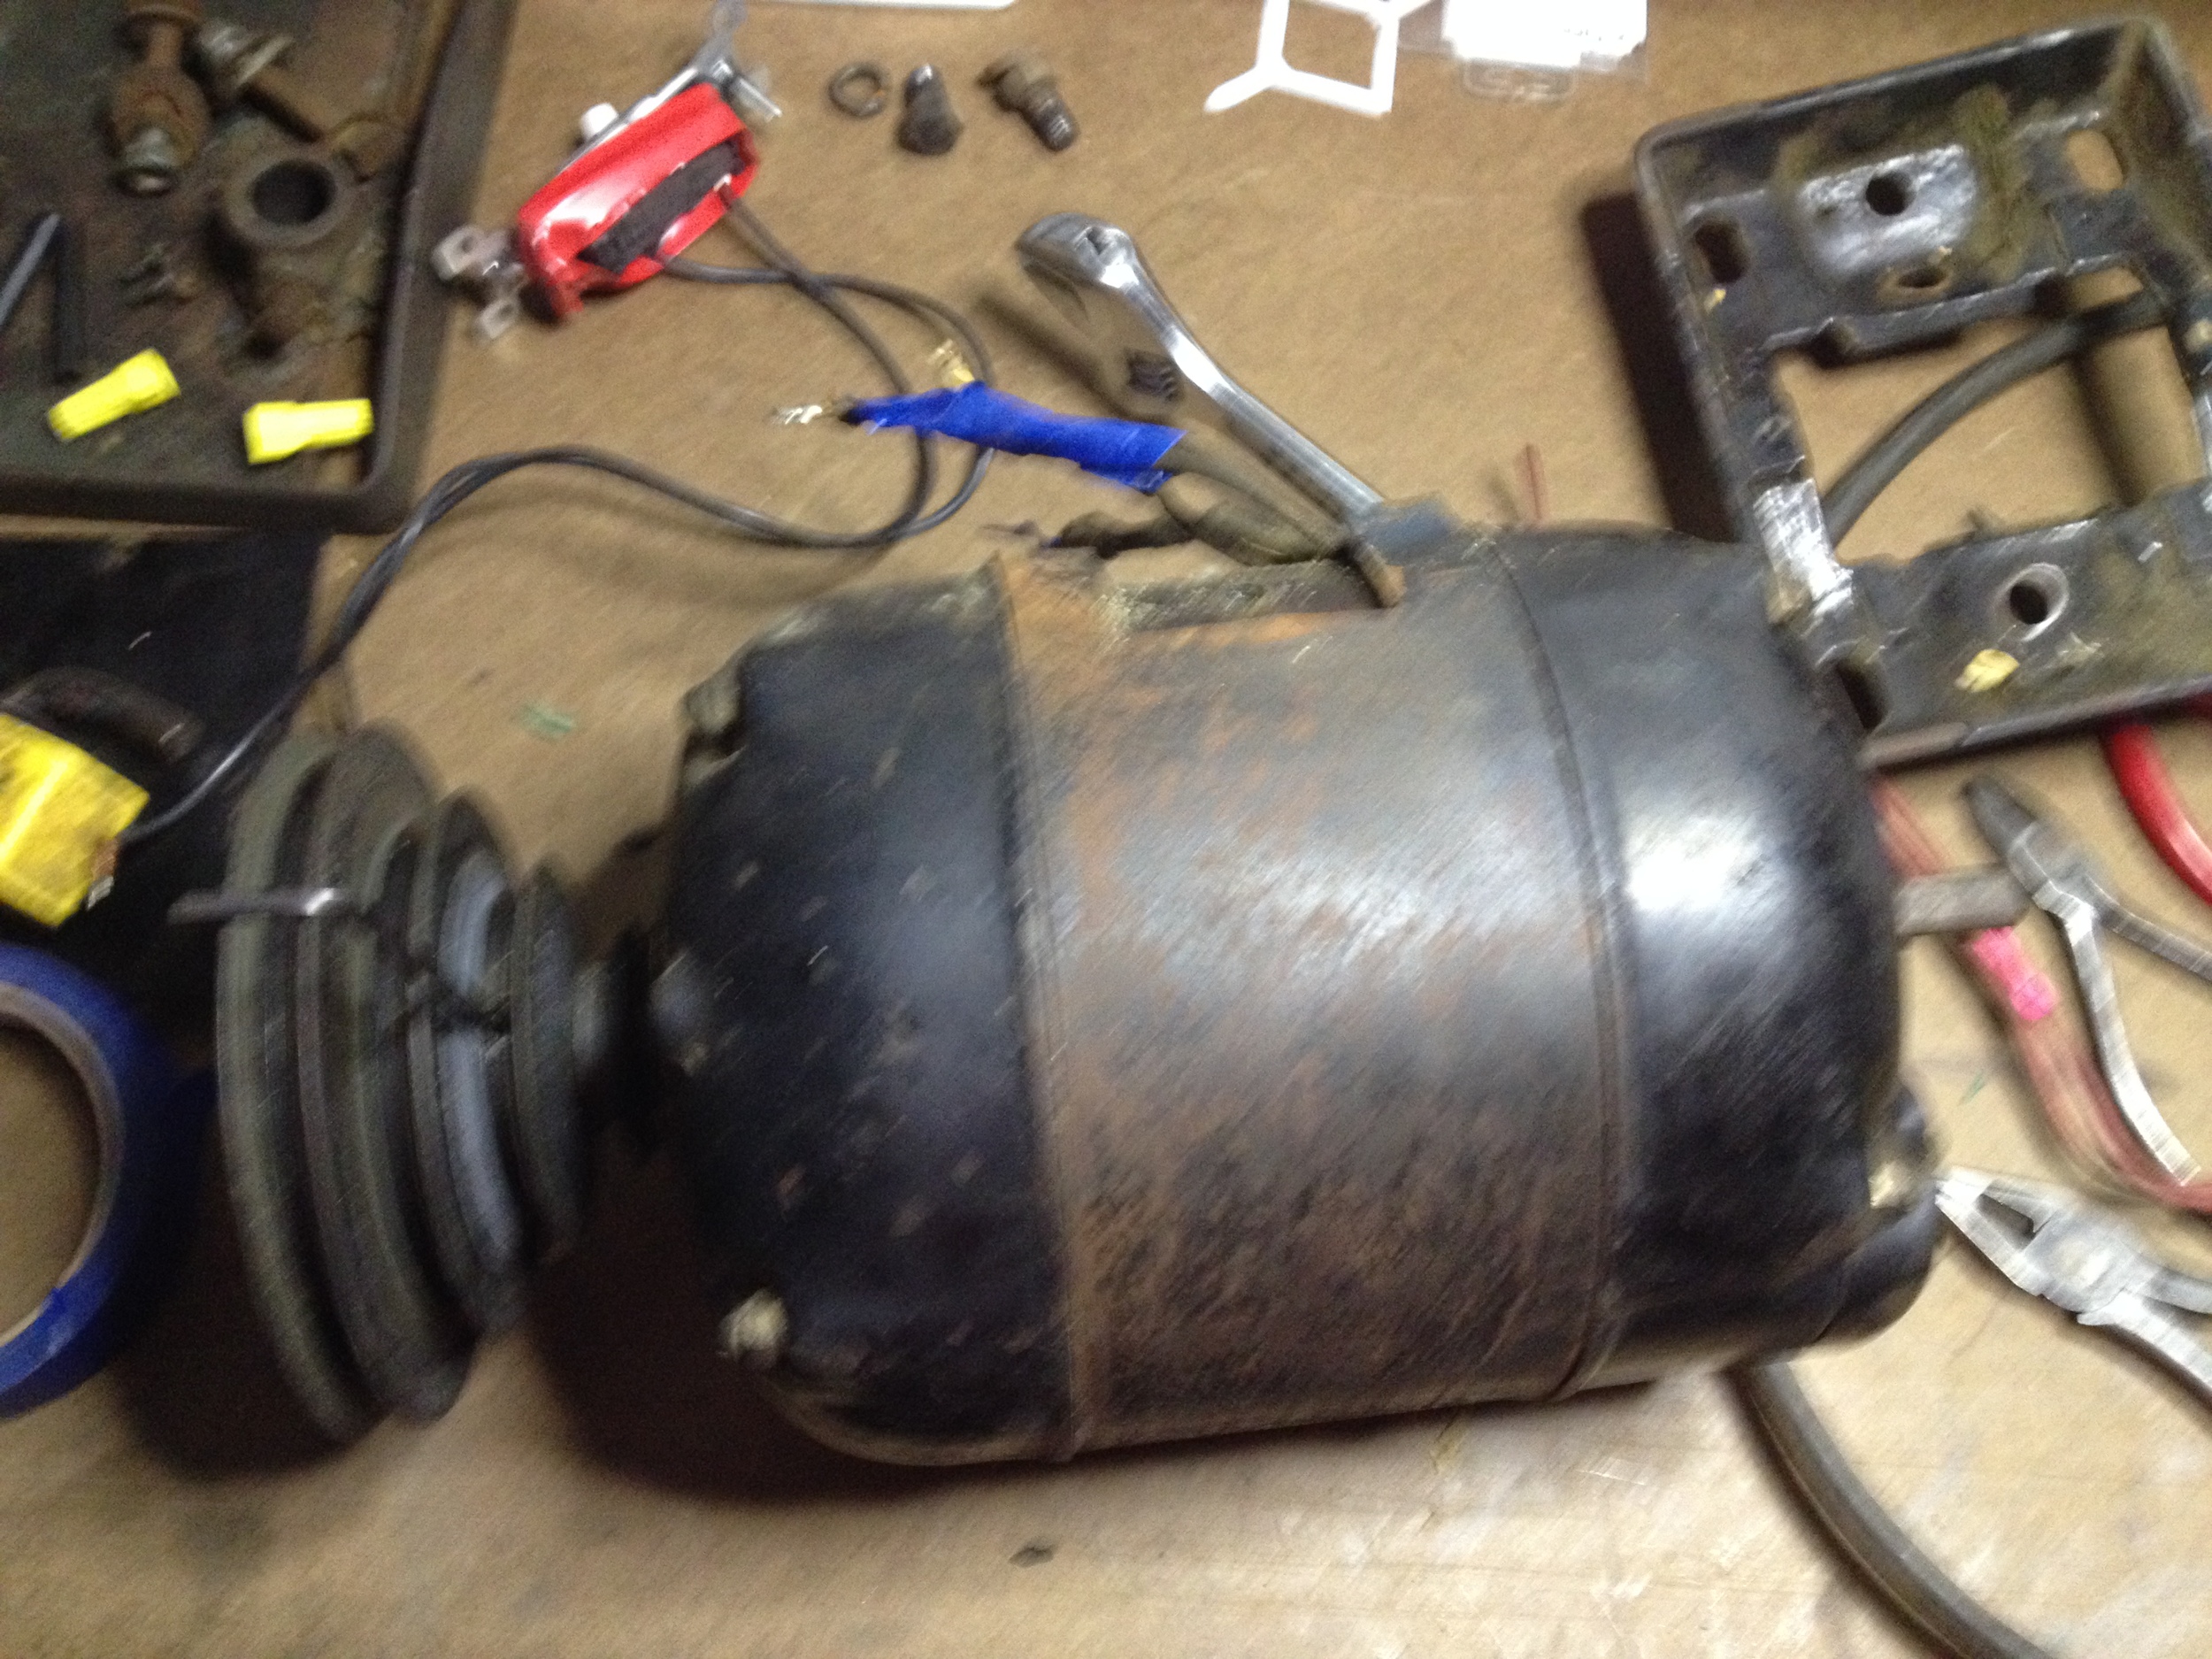  Craftsman motor with broken switch, rust, and more of that black paint. &nbsp;Pretty sure this is a replacement. &nbsp; 